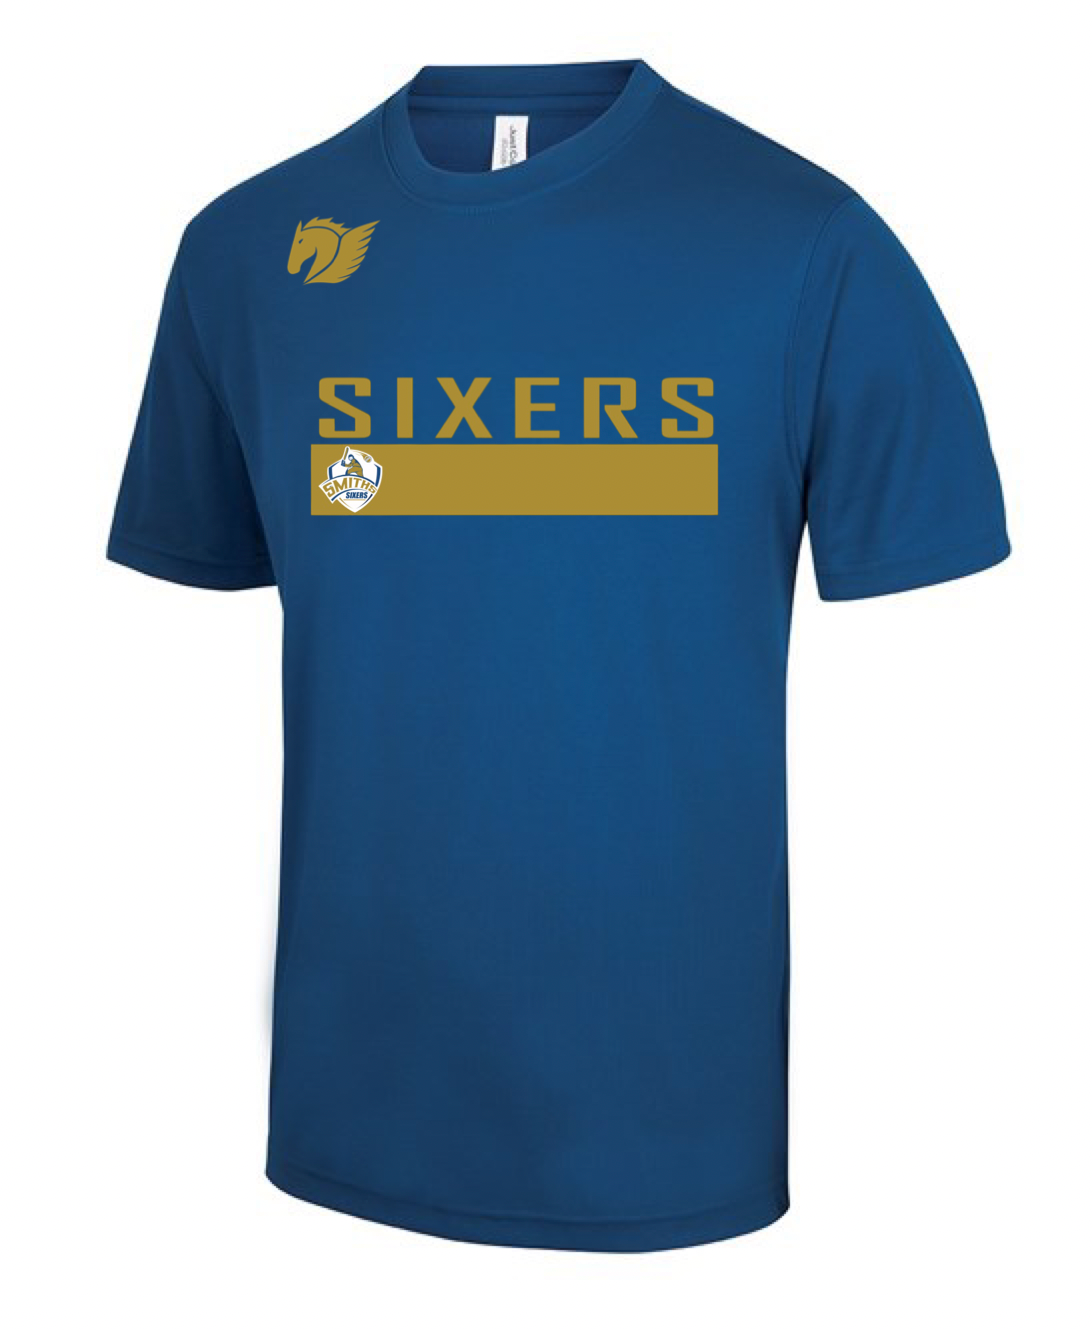 Smiths Sixers Supporters Shirt